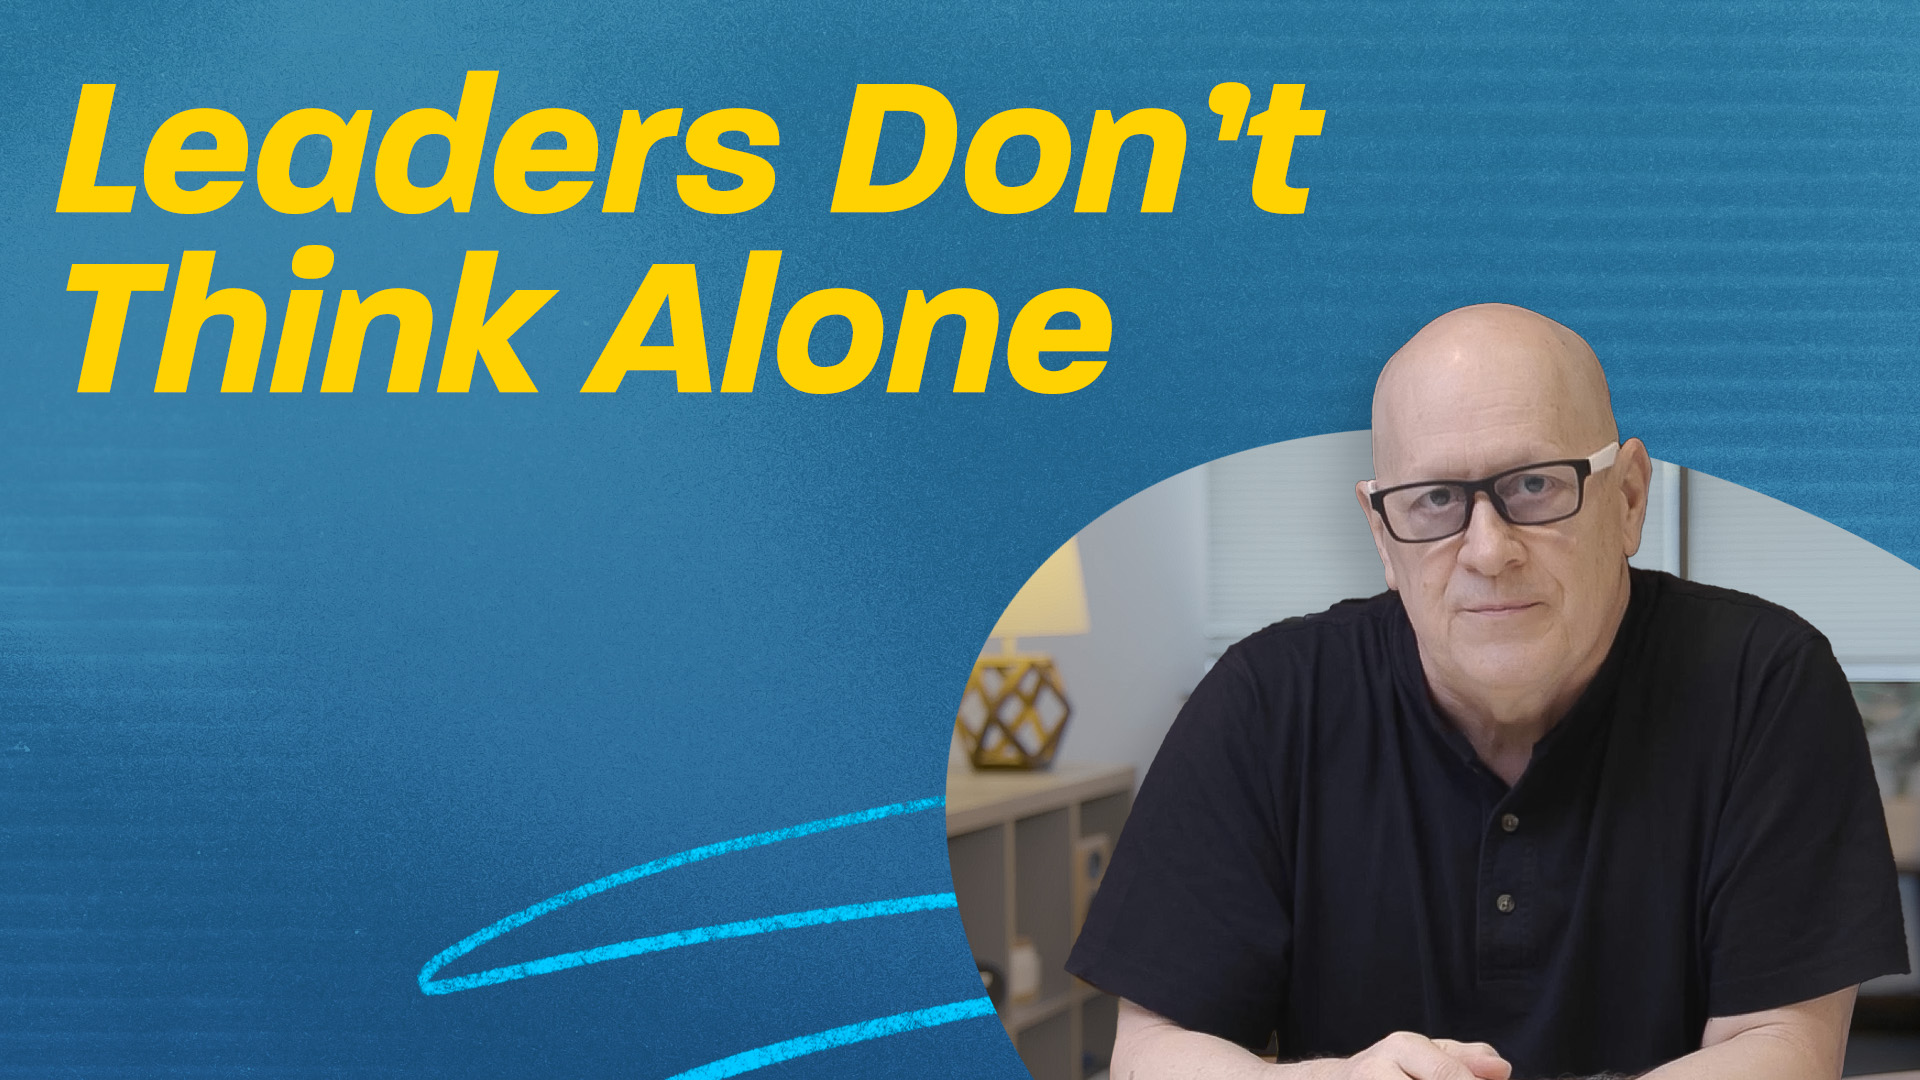 Leaders Don’t Think Alone